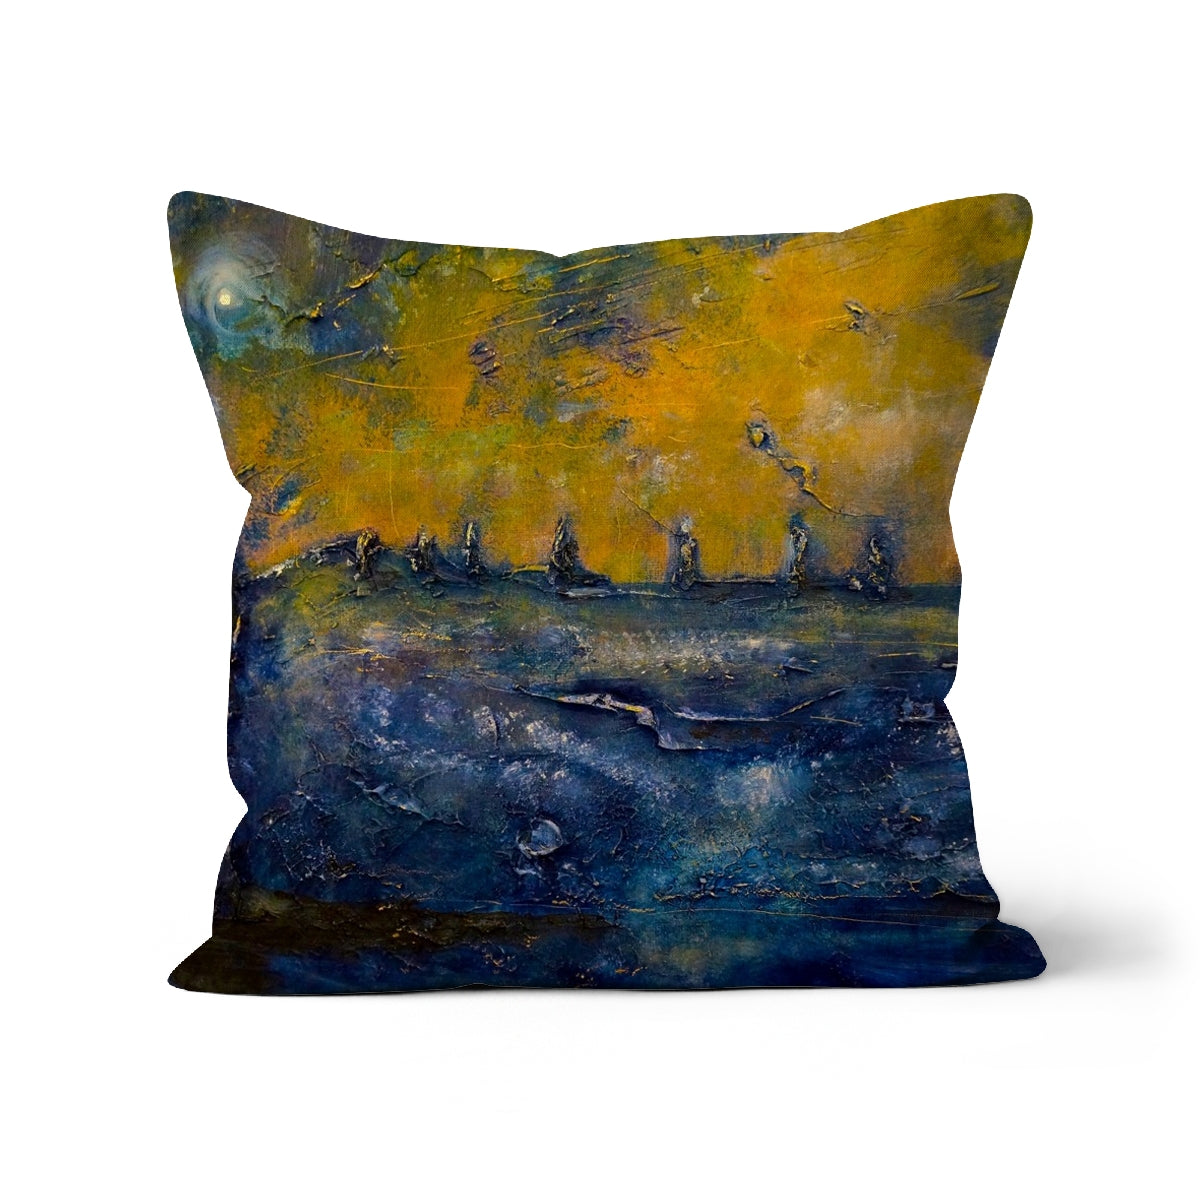 Brodgar Moonlight Orkney Art Gifts Cushion-Cushions-Orkney Art Gallery-Canvas-18"x18"-Paintings, Prints, Homeware, Art Gifts From Scotland By Scottish Artist Kevin Hunter